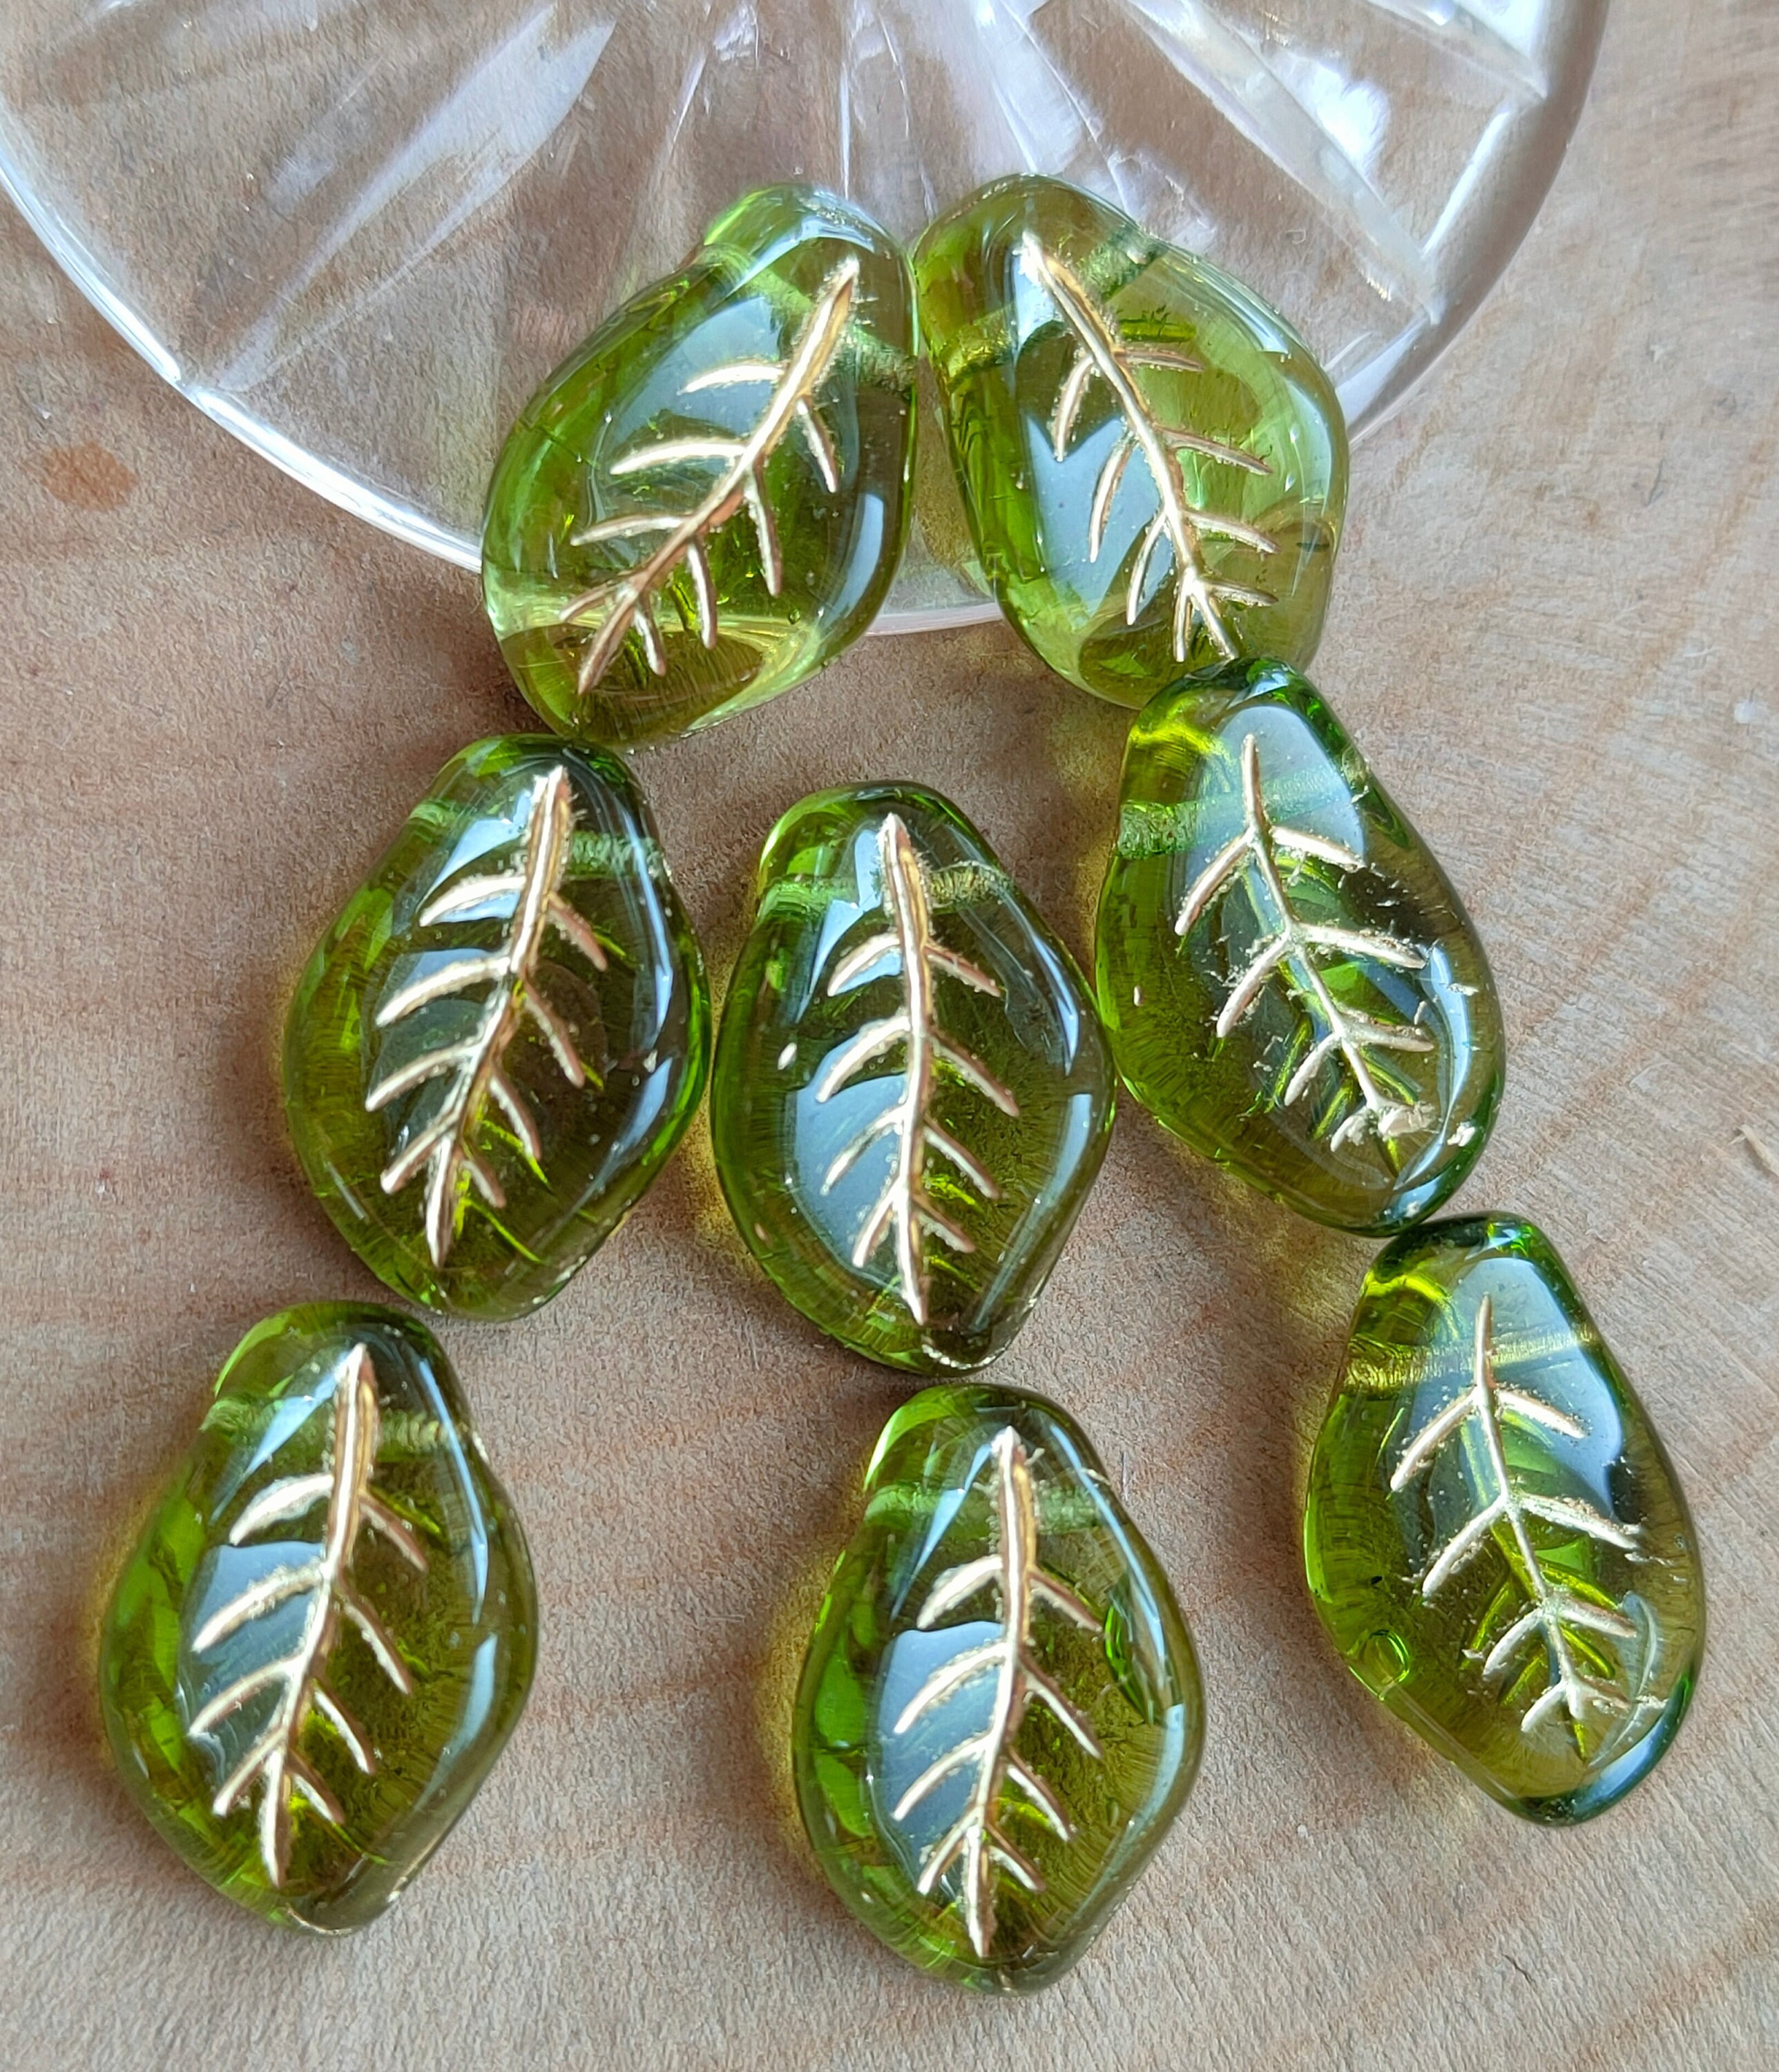 14x9mm Czech Glass Green Leaf Beads Olive Green Pressed Glass Leaves for  Jewelry Making, 15pc 